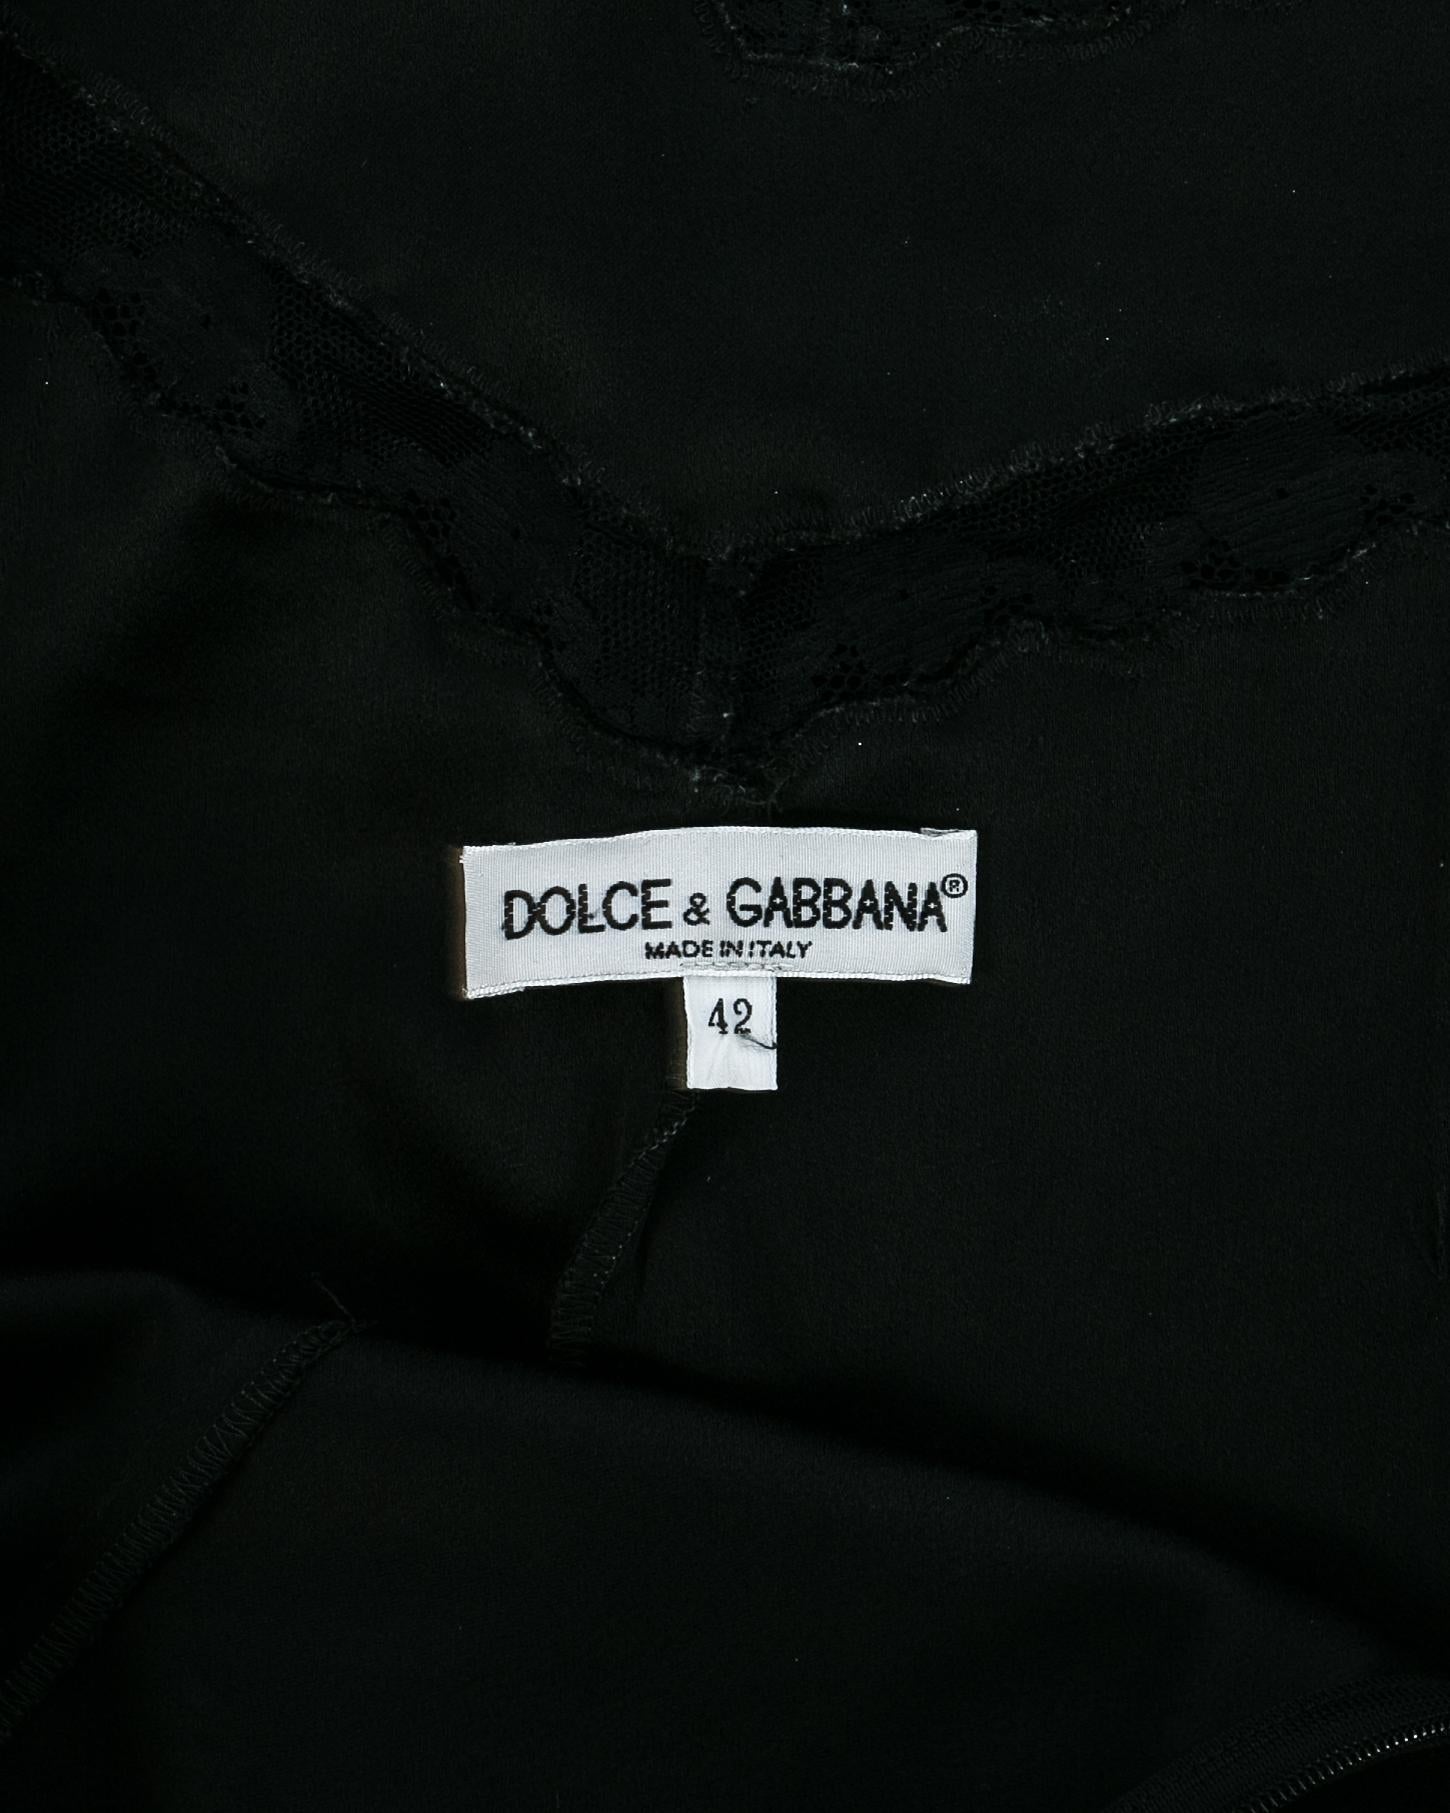 Dolce & Gabbana black crepe evening dress with lace cut outs and bra, A/W 1997 For Sale 2